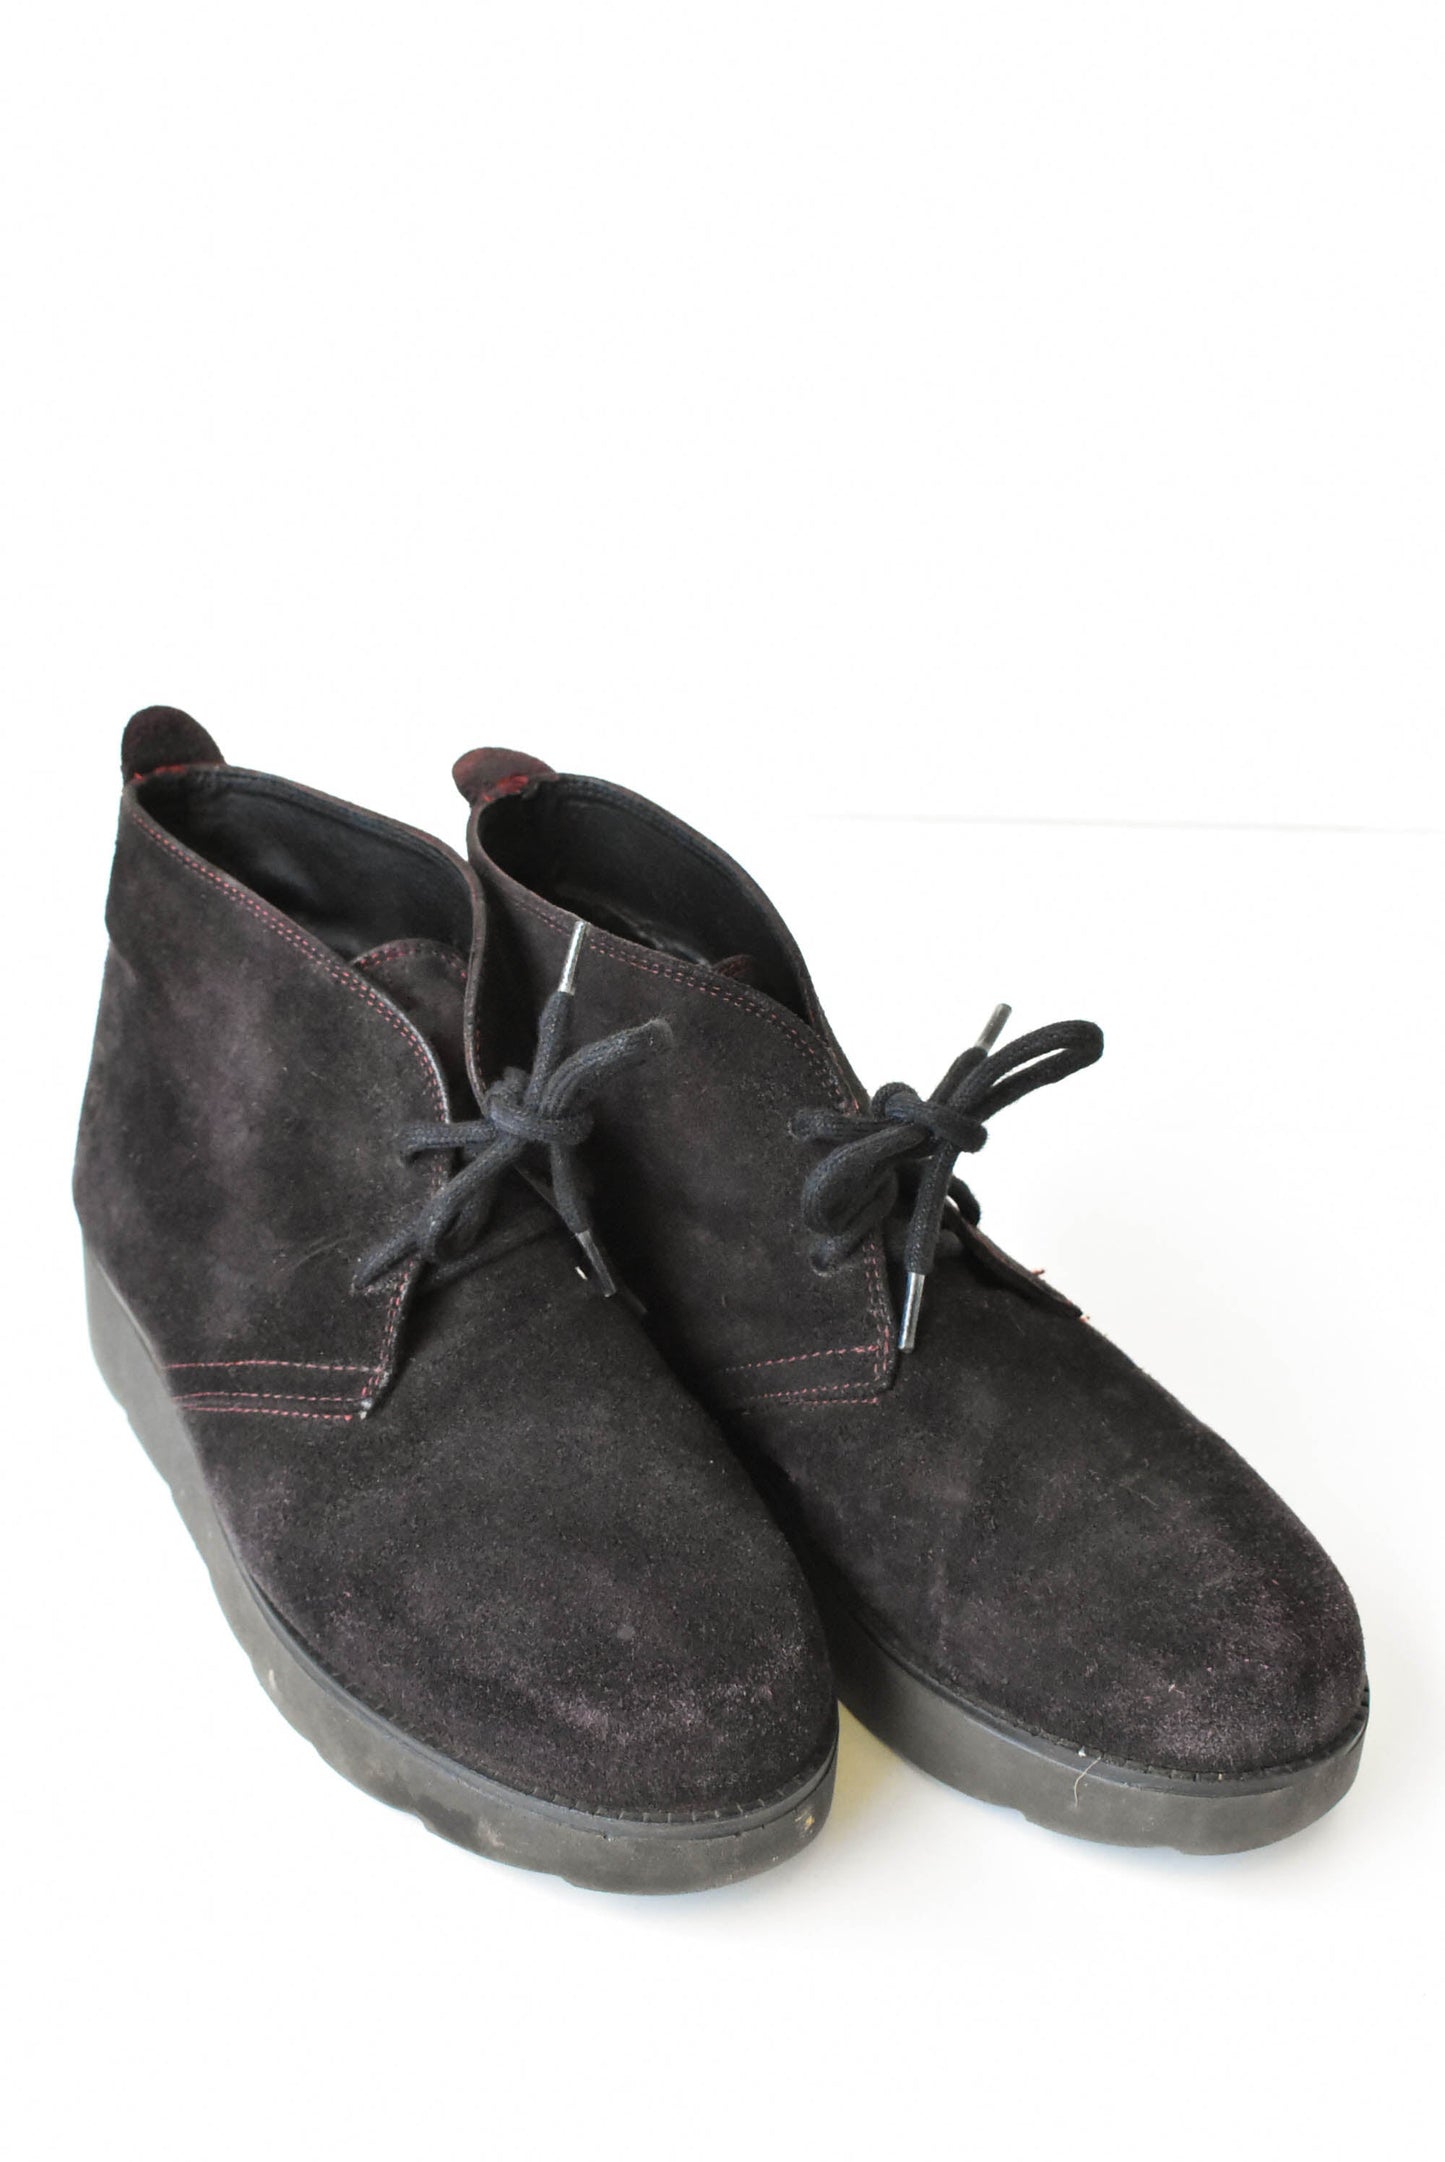 Bronx suede grape ankle boots, size 41